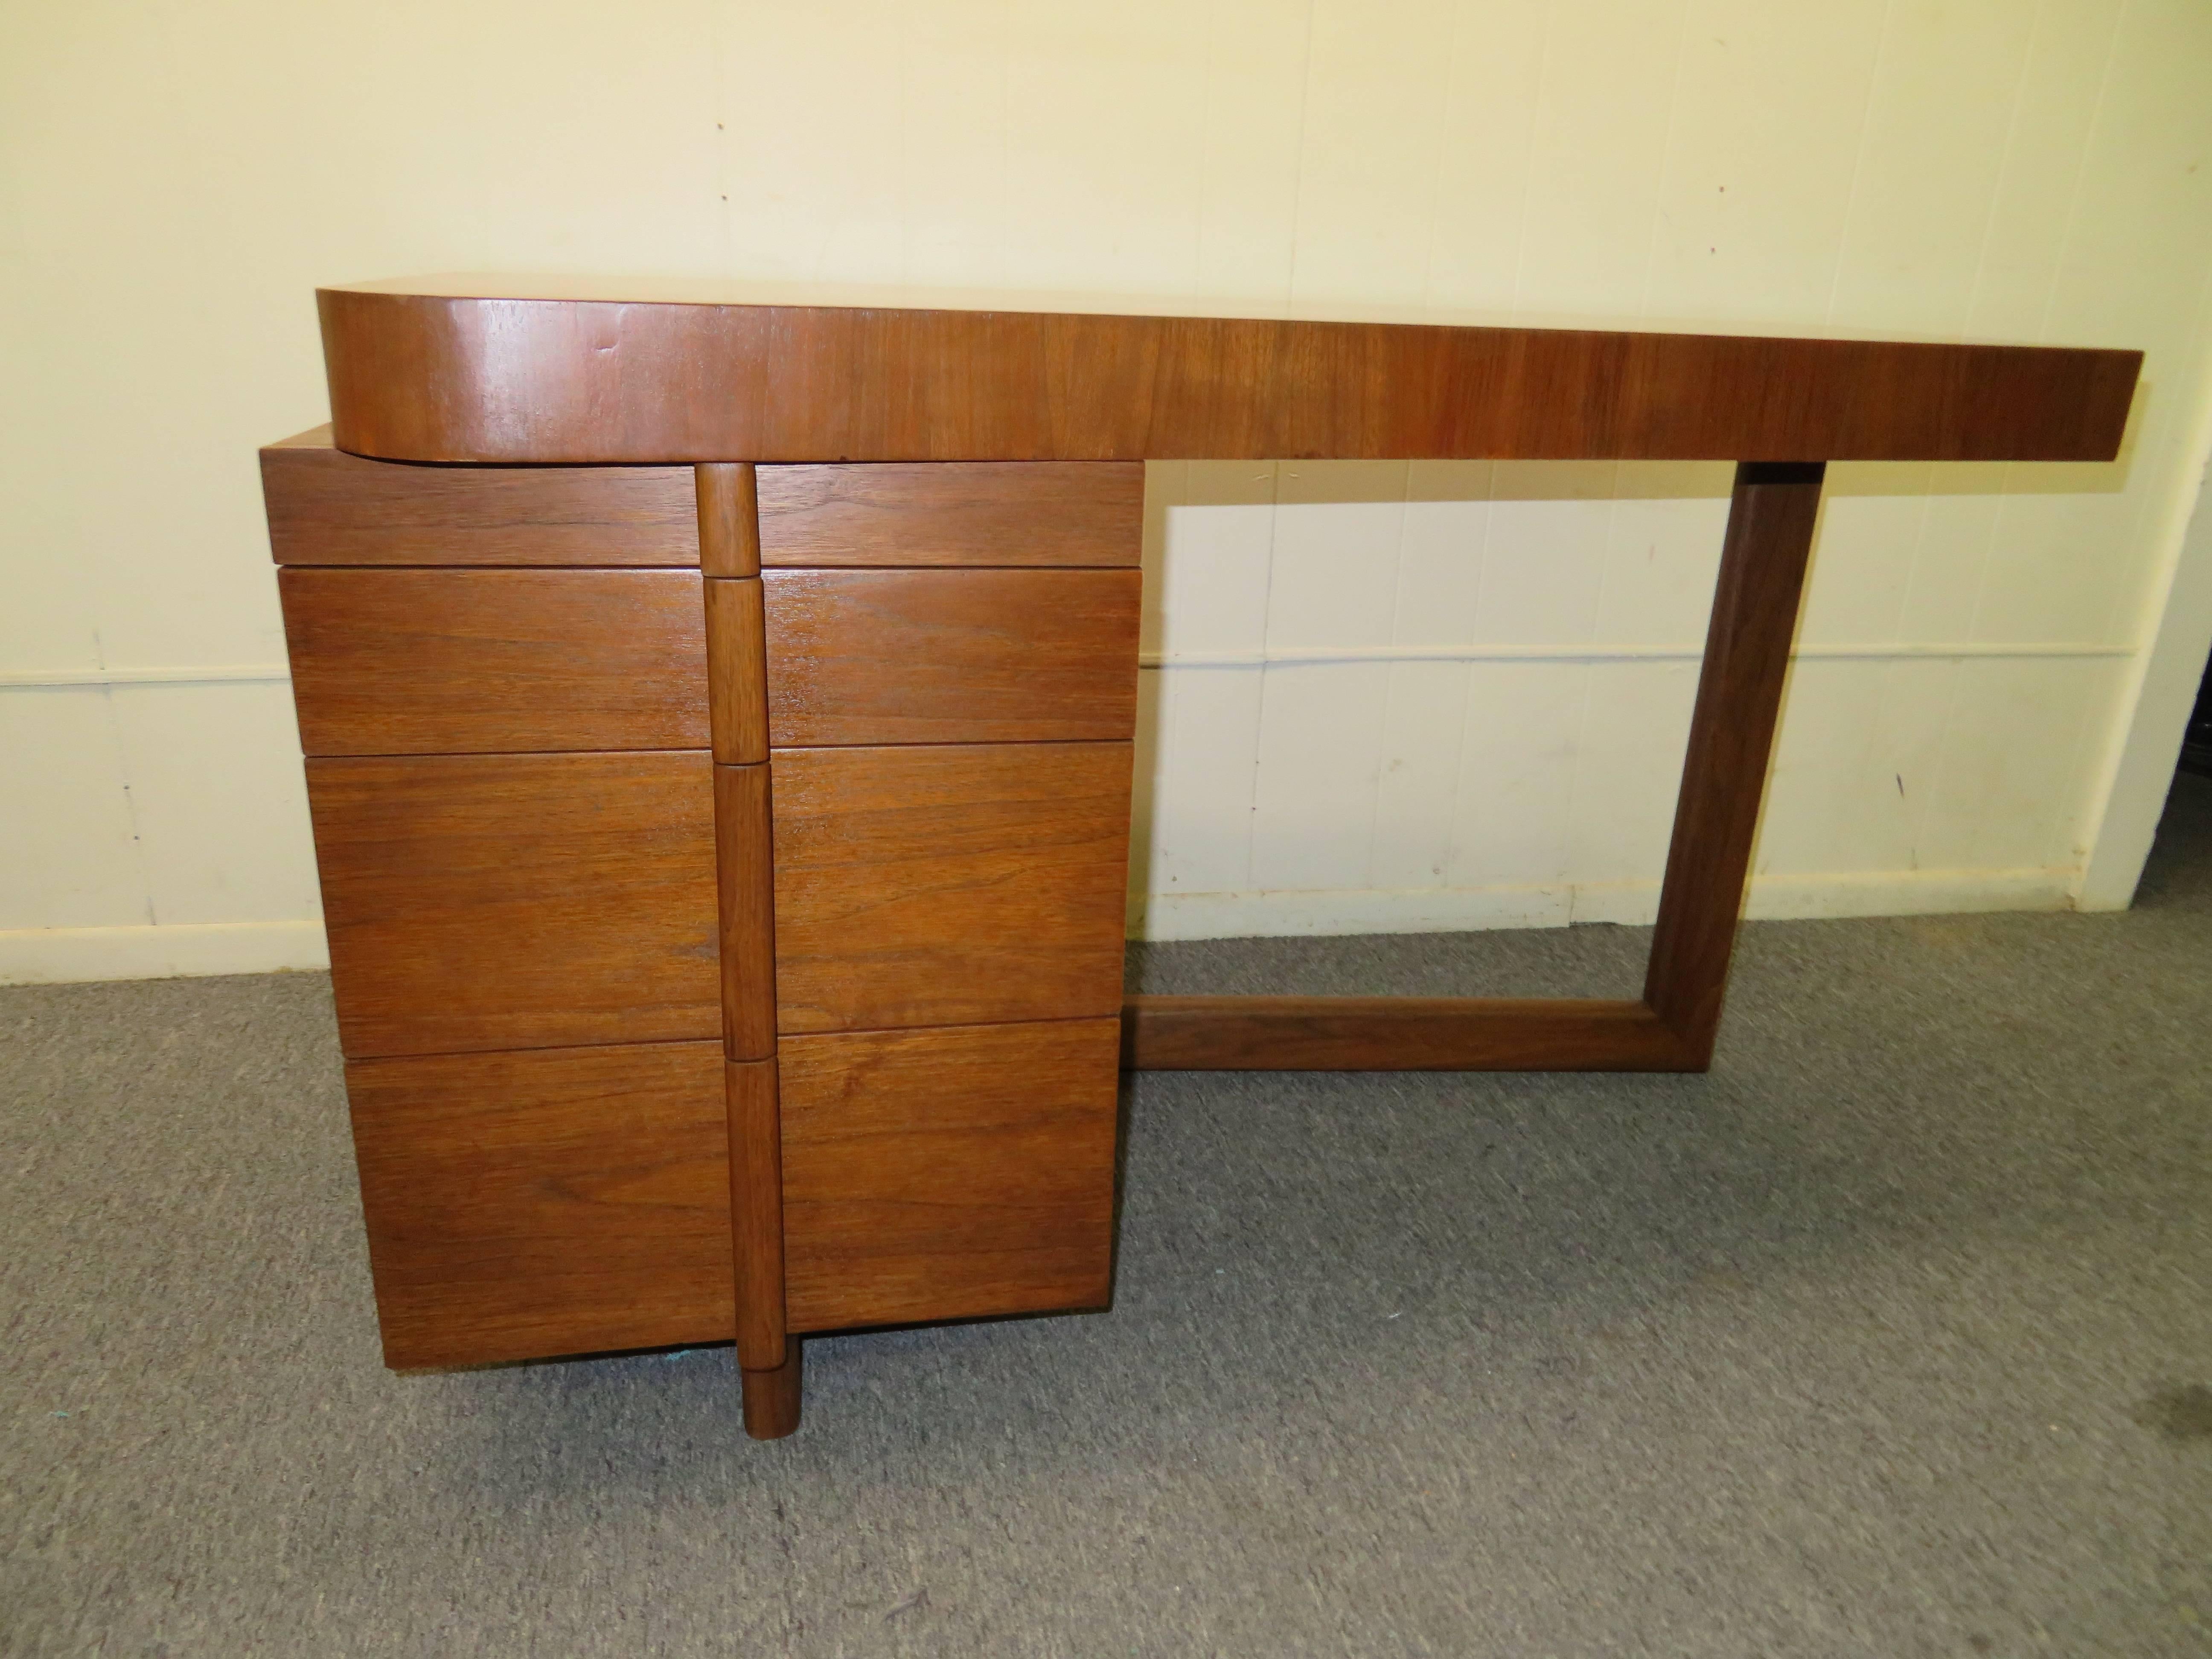 Lovely Gilbert Rohde attributed to asymmetrical top walnut desk. This fabulous 1940s desk has three drawers and a writing shelf, very uniquely designed with wonderful architectural lines. The desk can be placed against a wall or window and can even